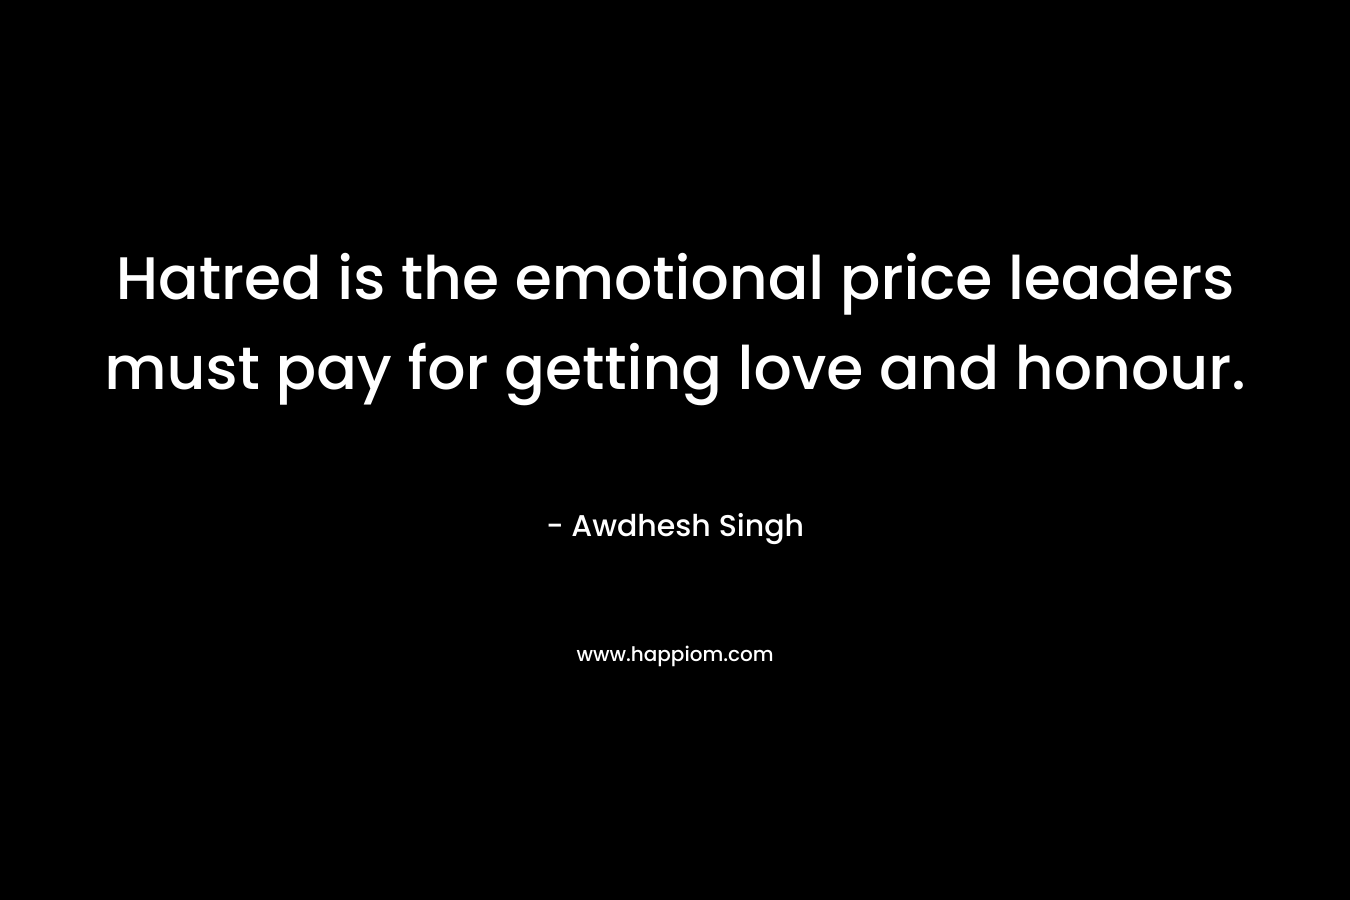 Hatred is the emotional price leaders must pay for getting love and honour. – Awdhesh Singh